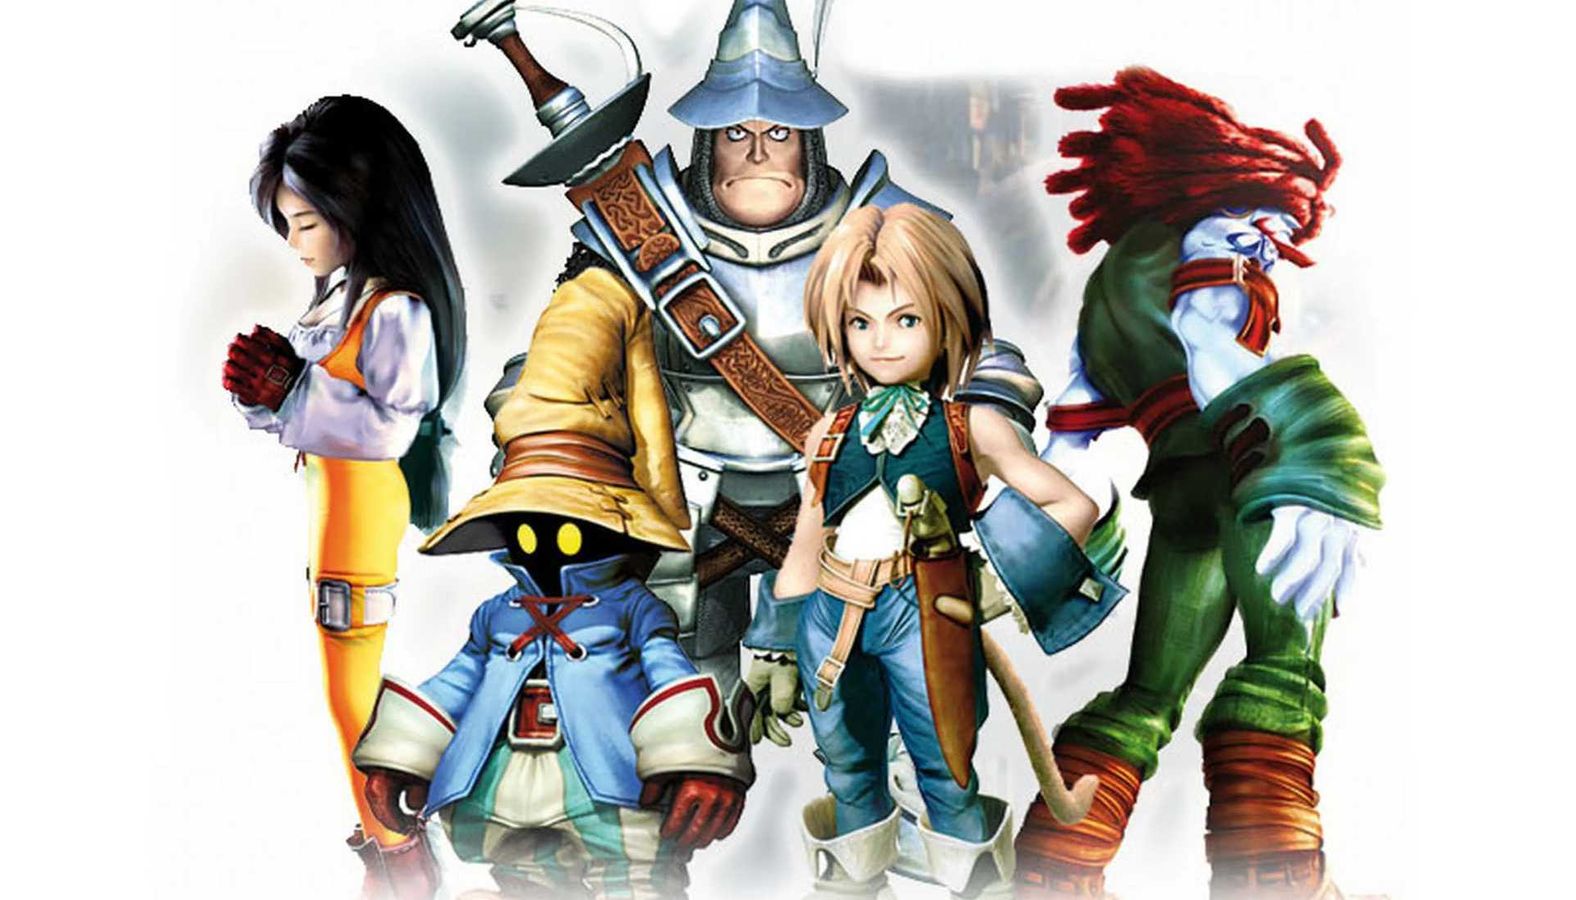 final fantasy ix remake not very ambitious